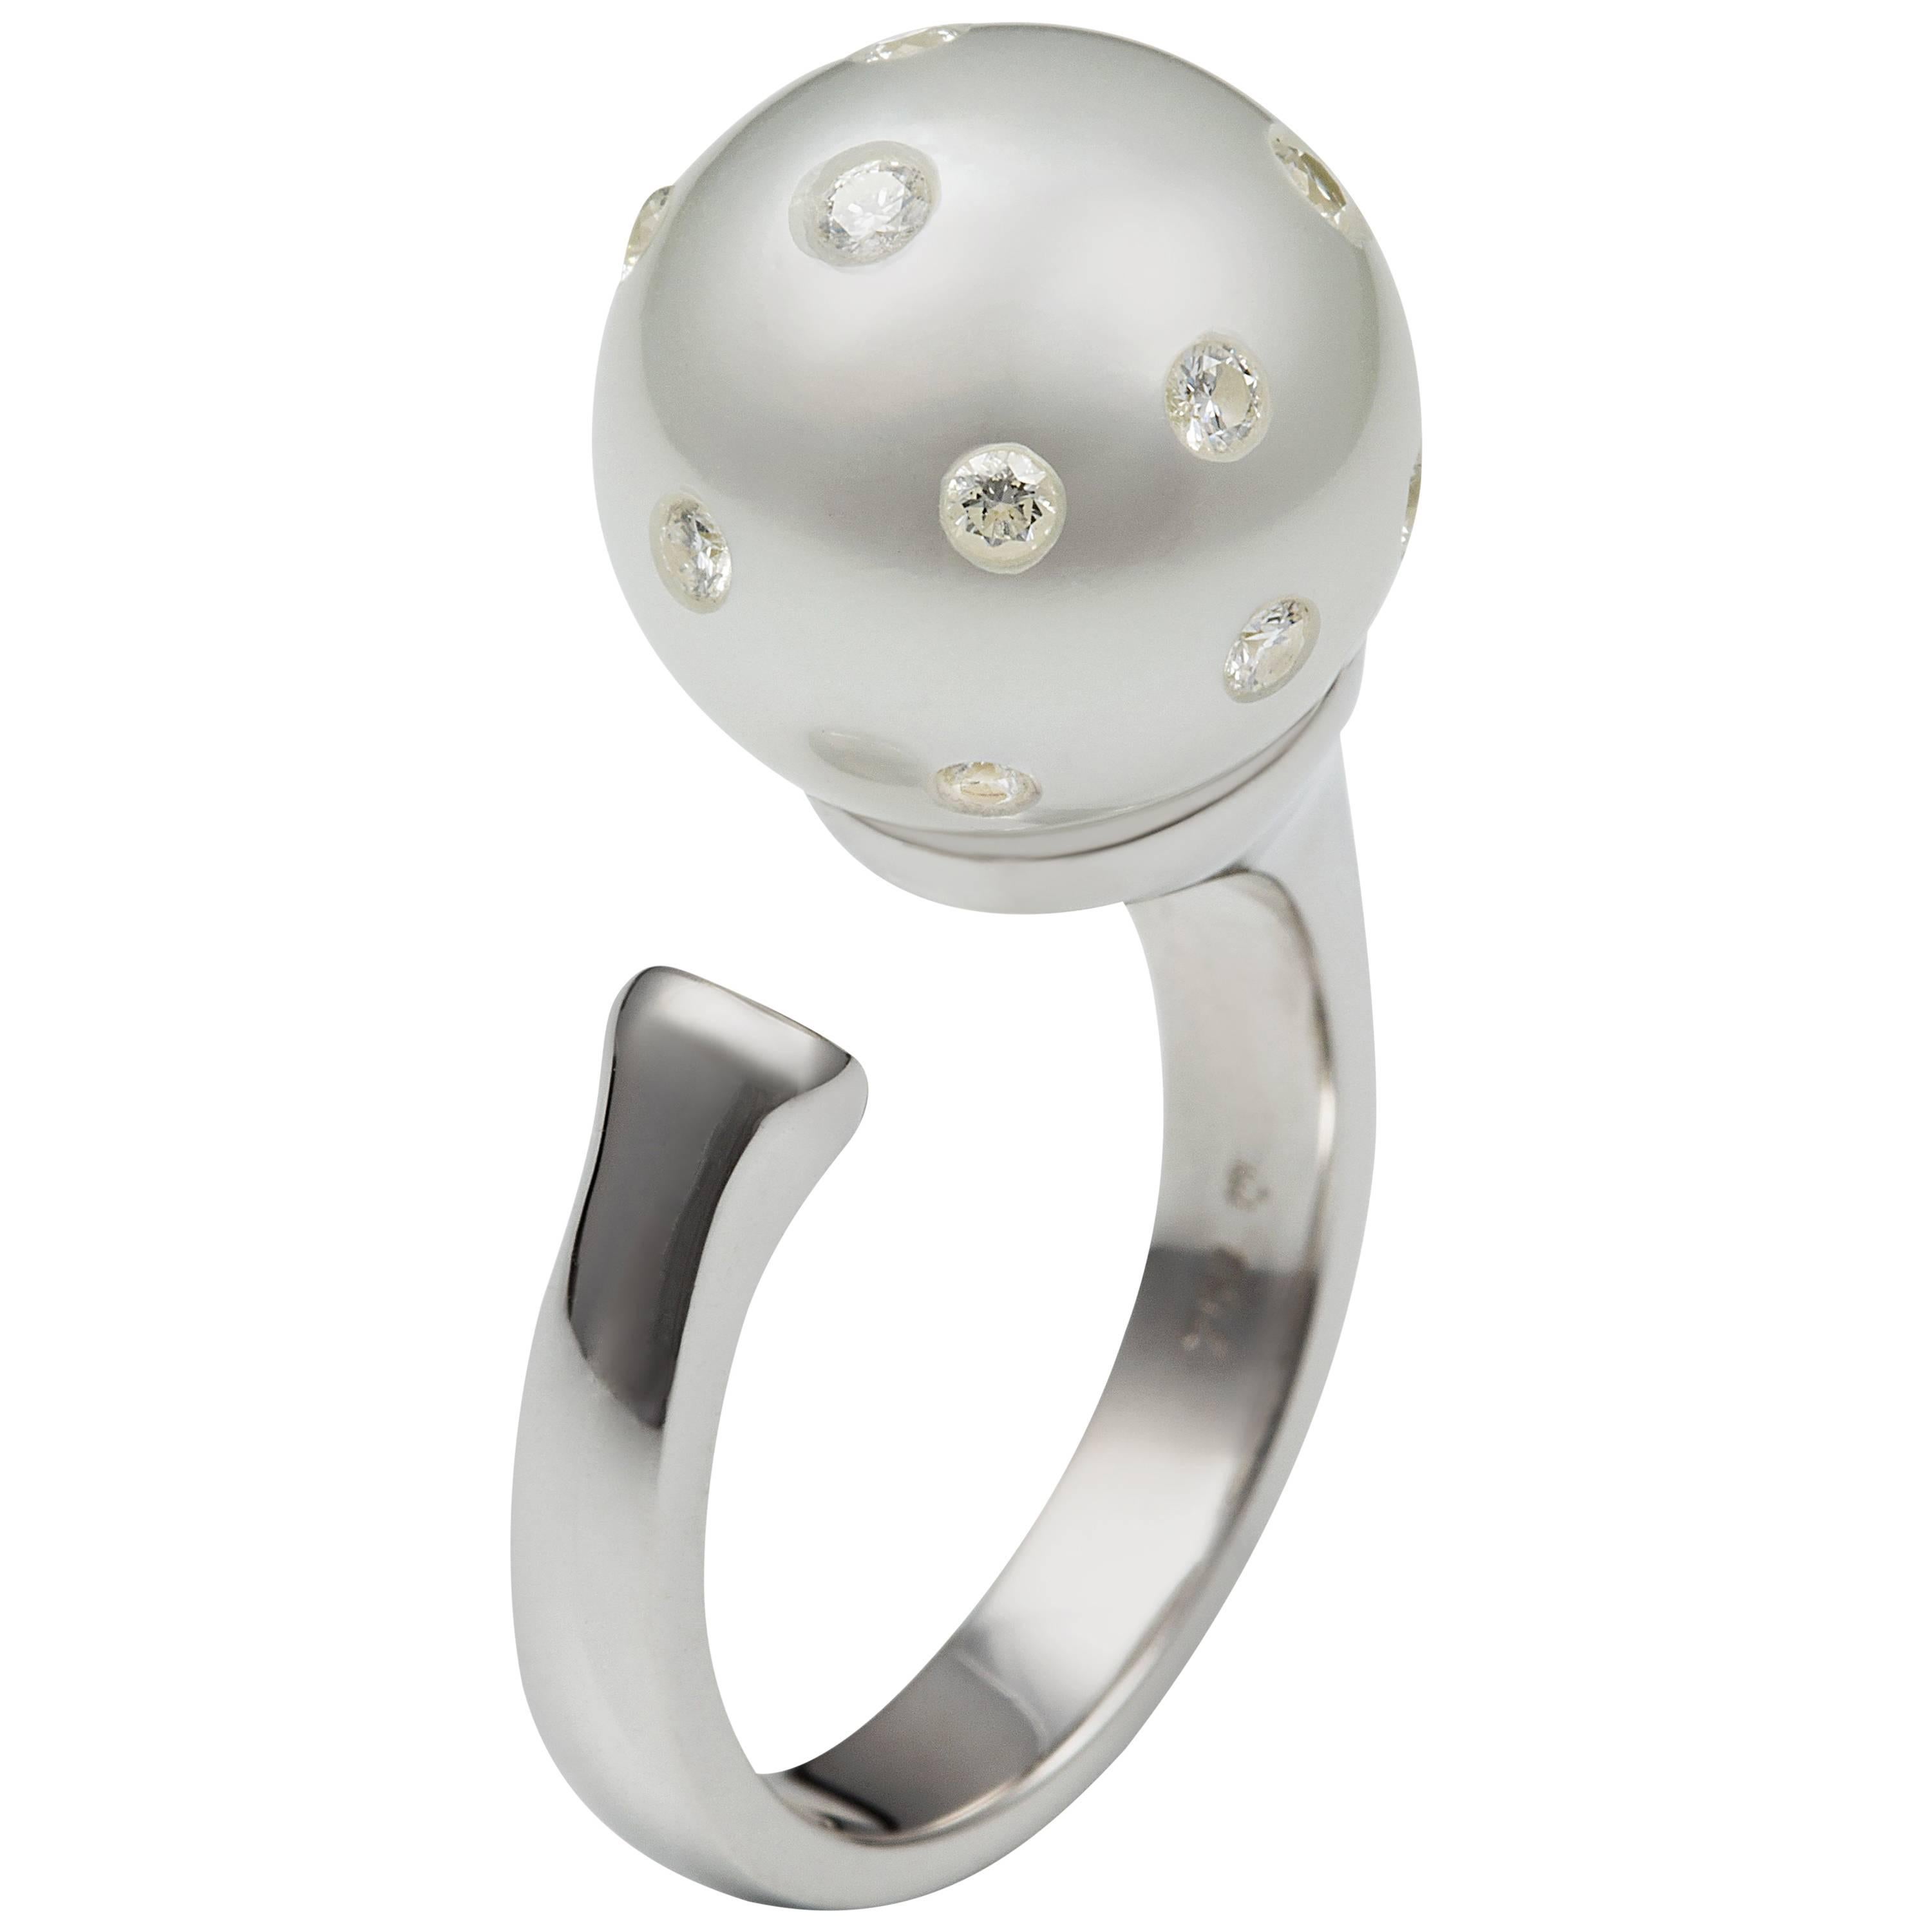 Lust Pearls South Sea White Pearl 0.28 Carat White Diamond Cocktail Ring For Sale